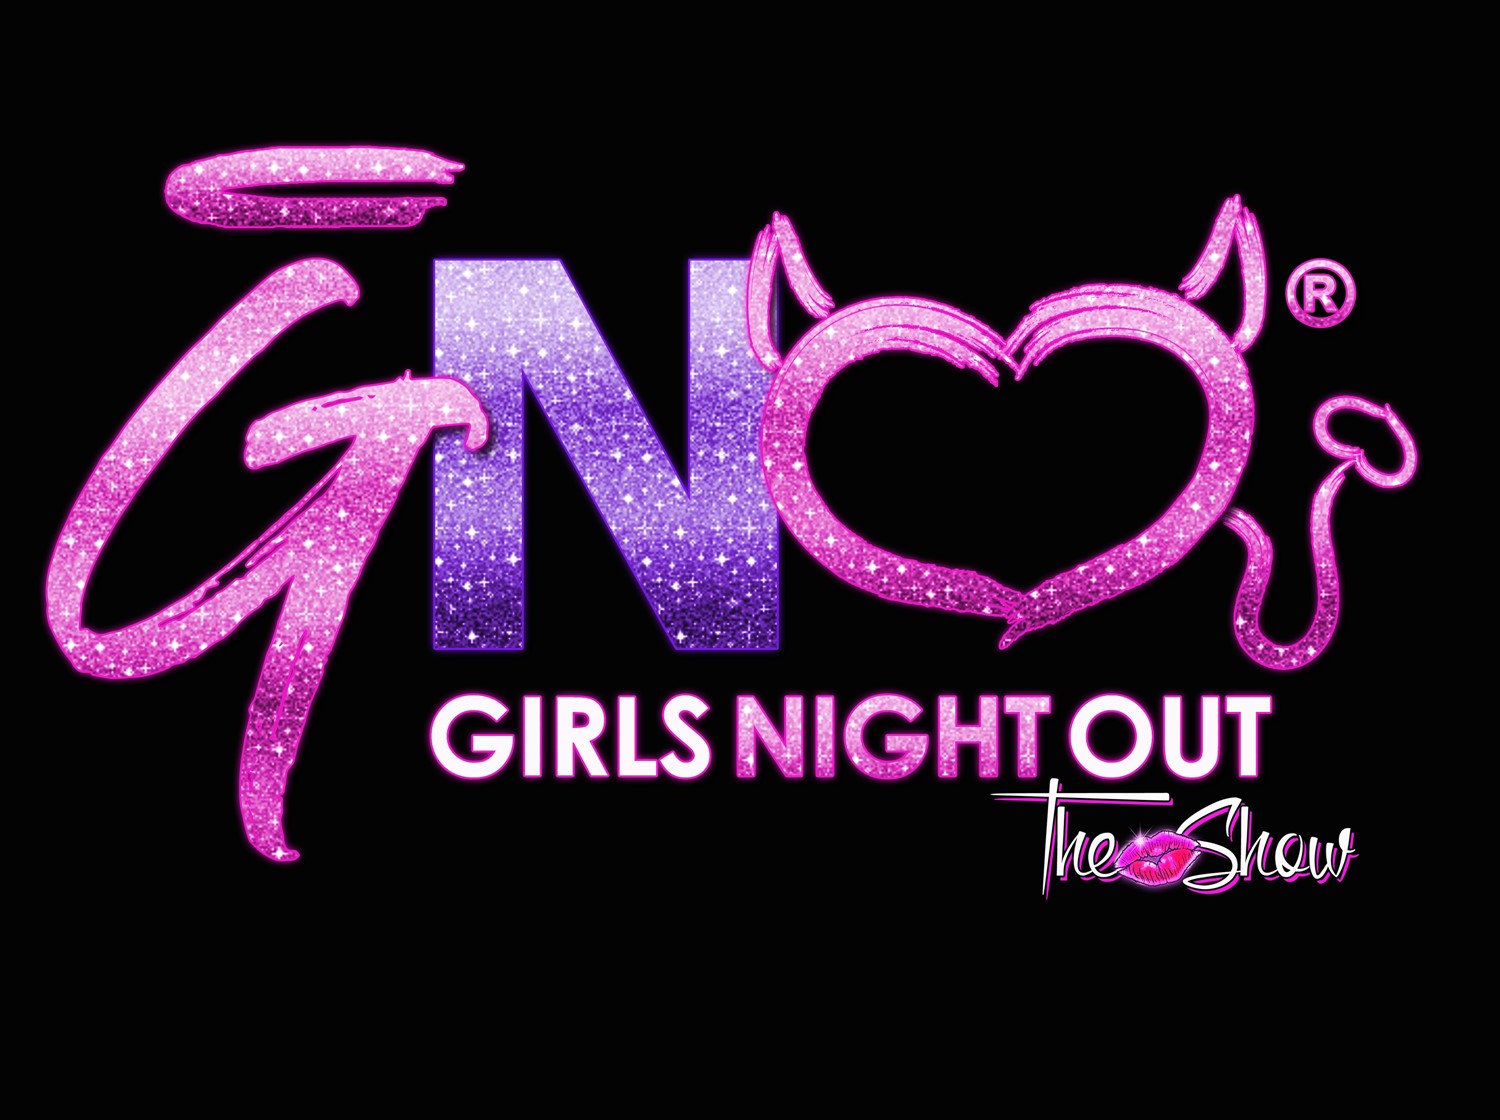 The Tipsy Turtle (21+) Muskego, WI on May 30, 20:00@Tipsy Turtle - Buy tickets and Get information on Girls Night Out the Show tickets.girlsnightouttheshow.com